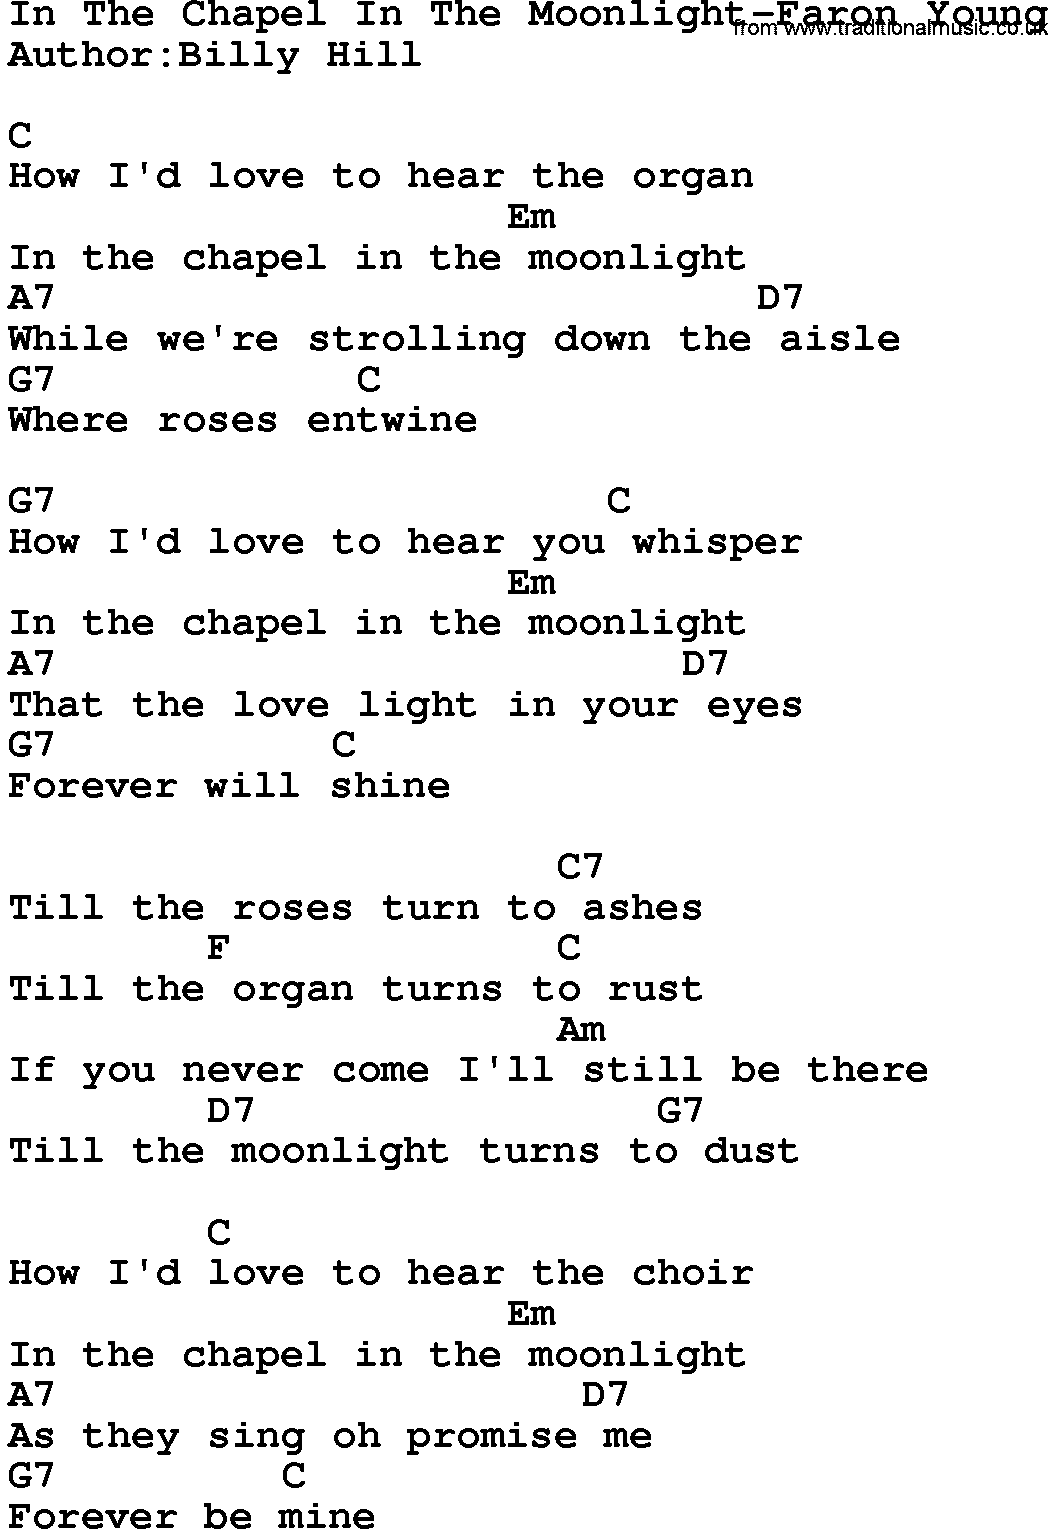 Country music song: In The Chapel In The Moonlight-Faron Young lyrics and chords